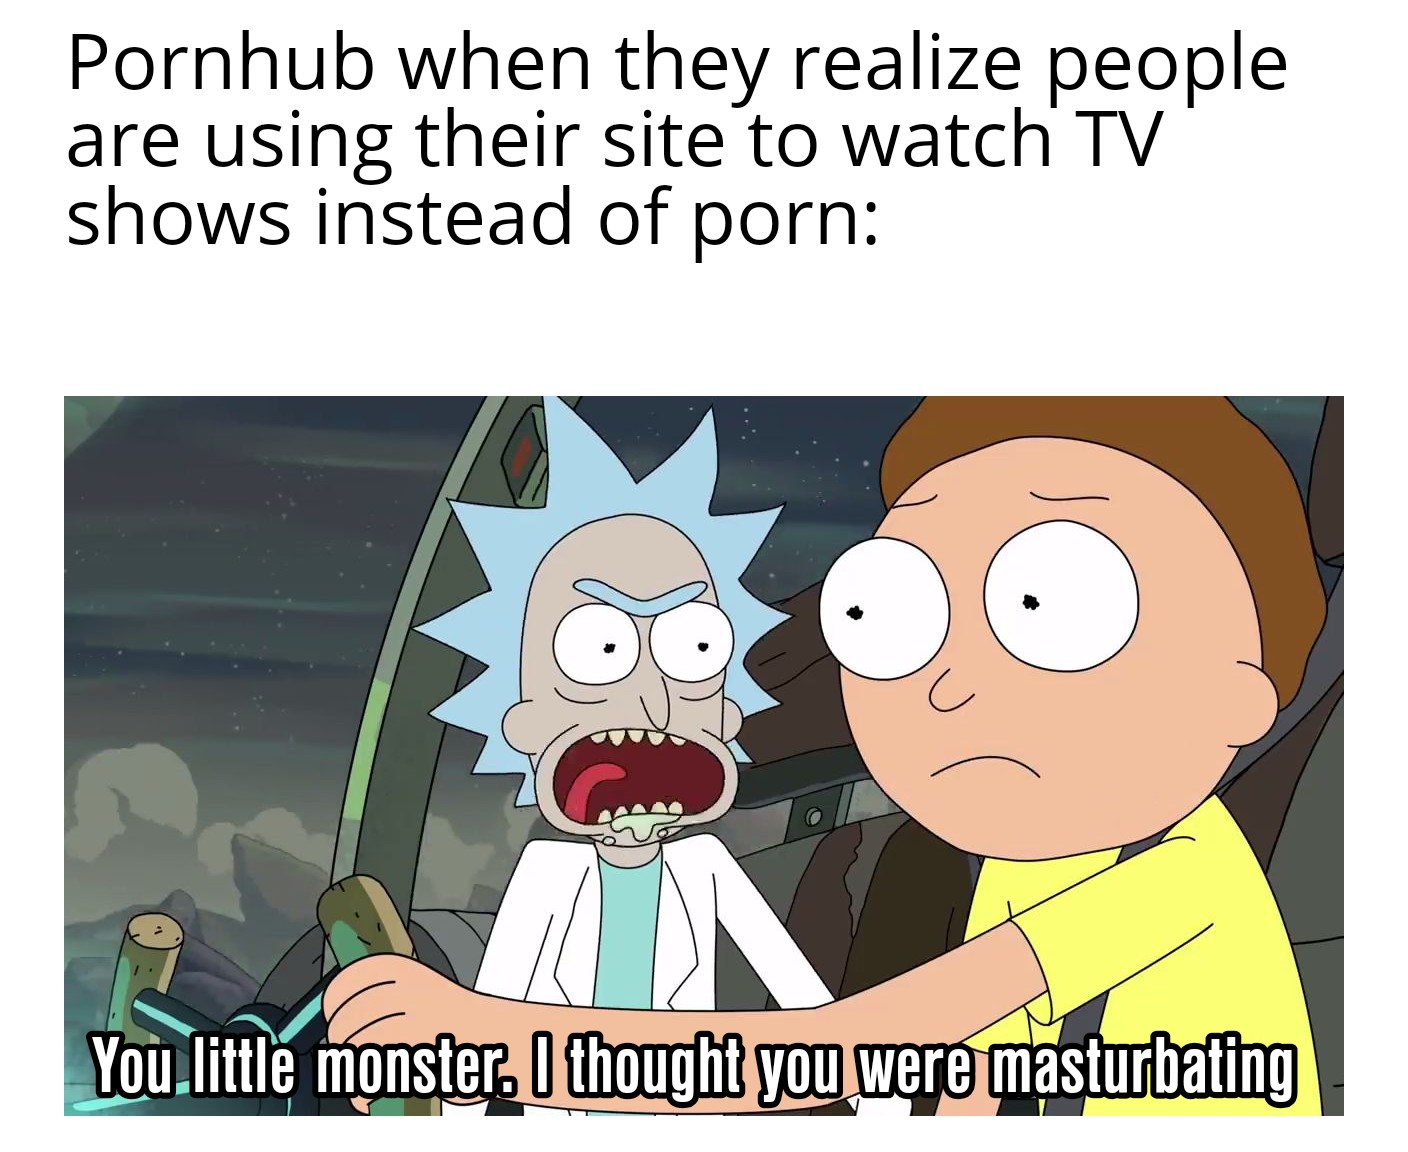 Dank Meme, NSFW, Rick and Morty dank-memes cute text: Pornhub when they realize people are using their site to watch TV shows instead of porn: QO You-little monster. I thought you were masturbating 